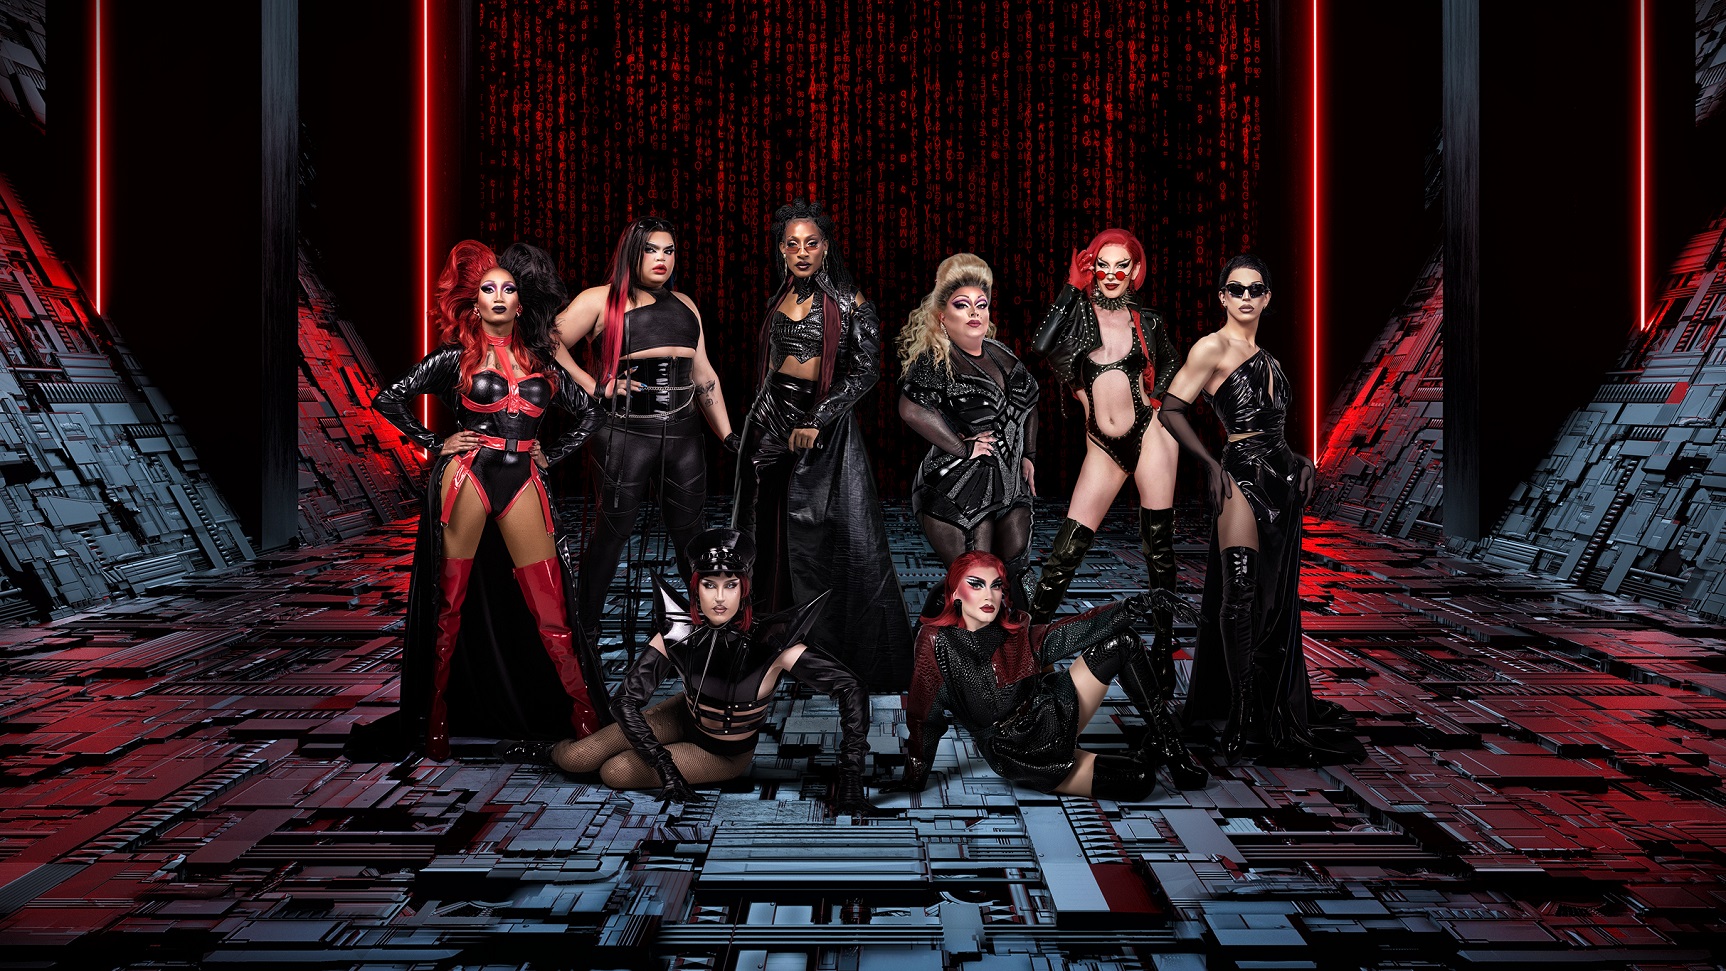 The Queens from RuPaul's Drag Race Werq The World. Group all dressed in various black outfits with red on futuristic style set with dark grey floor with red lighting and dark background.